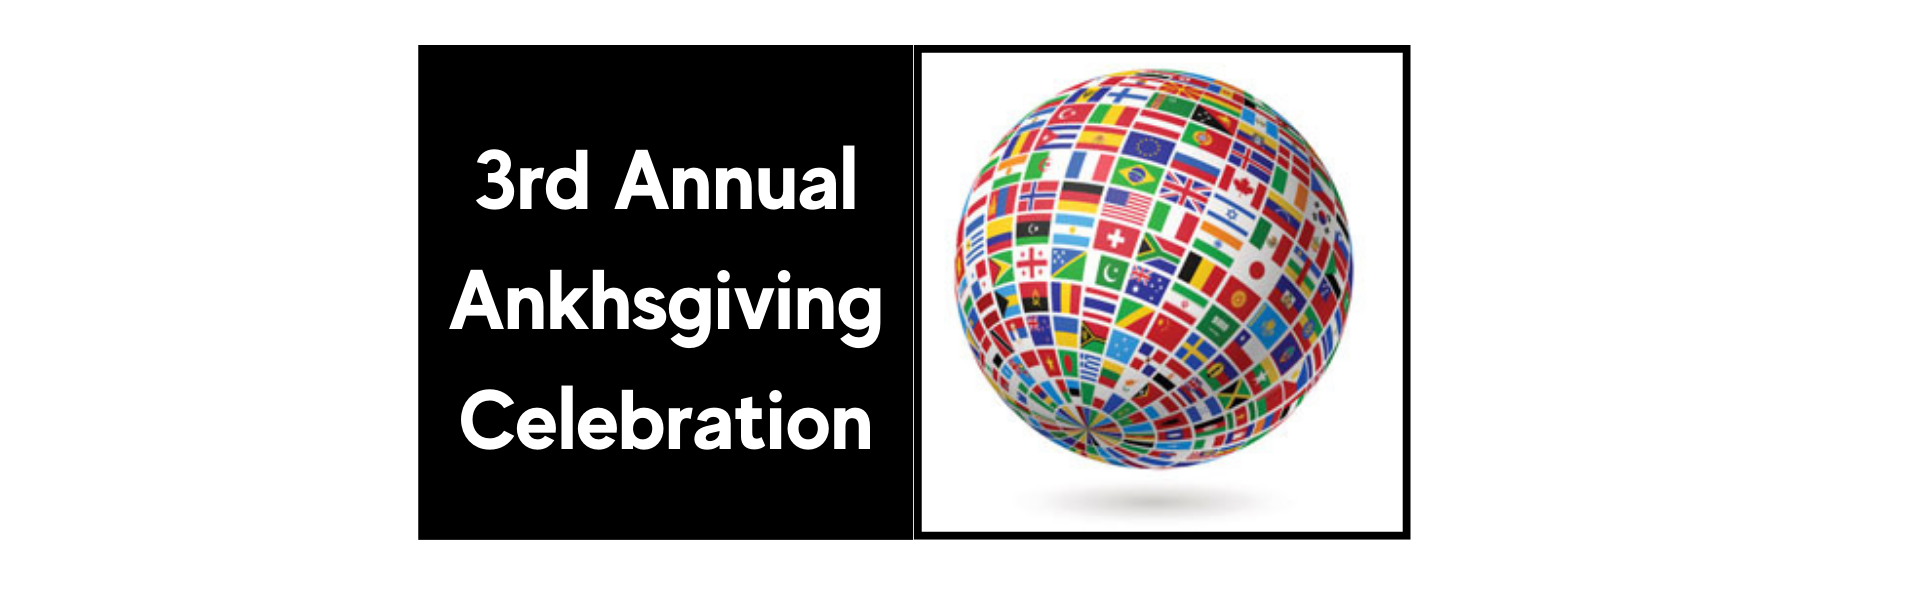 3rd-Annual-Ankhsgiving-Celebration.png